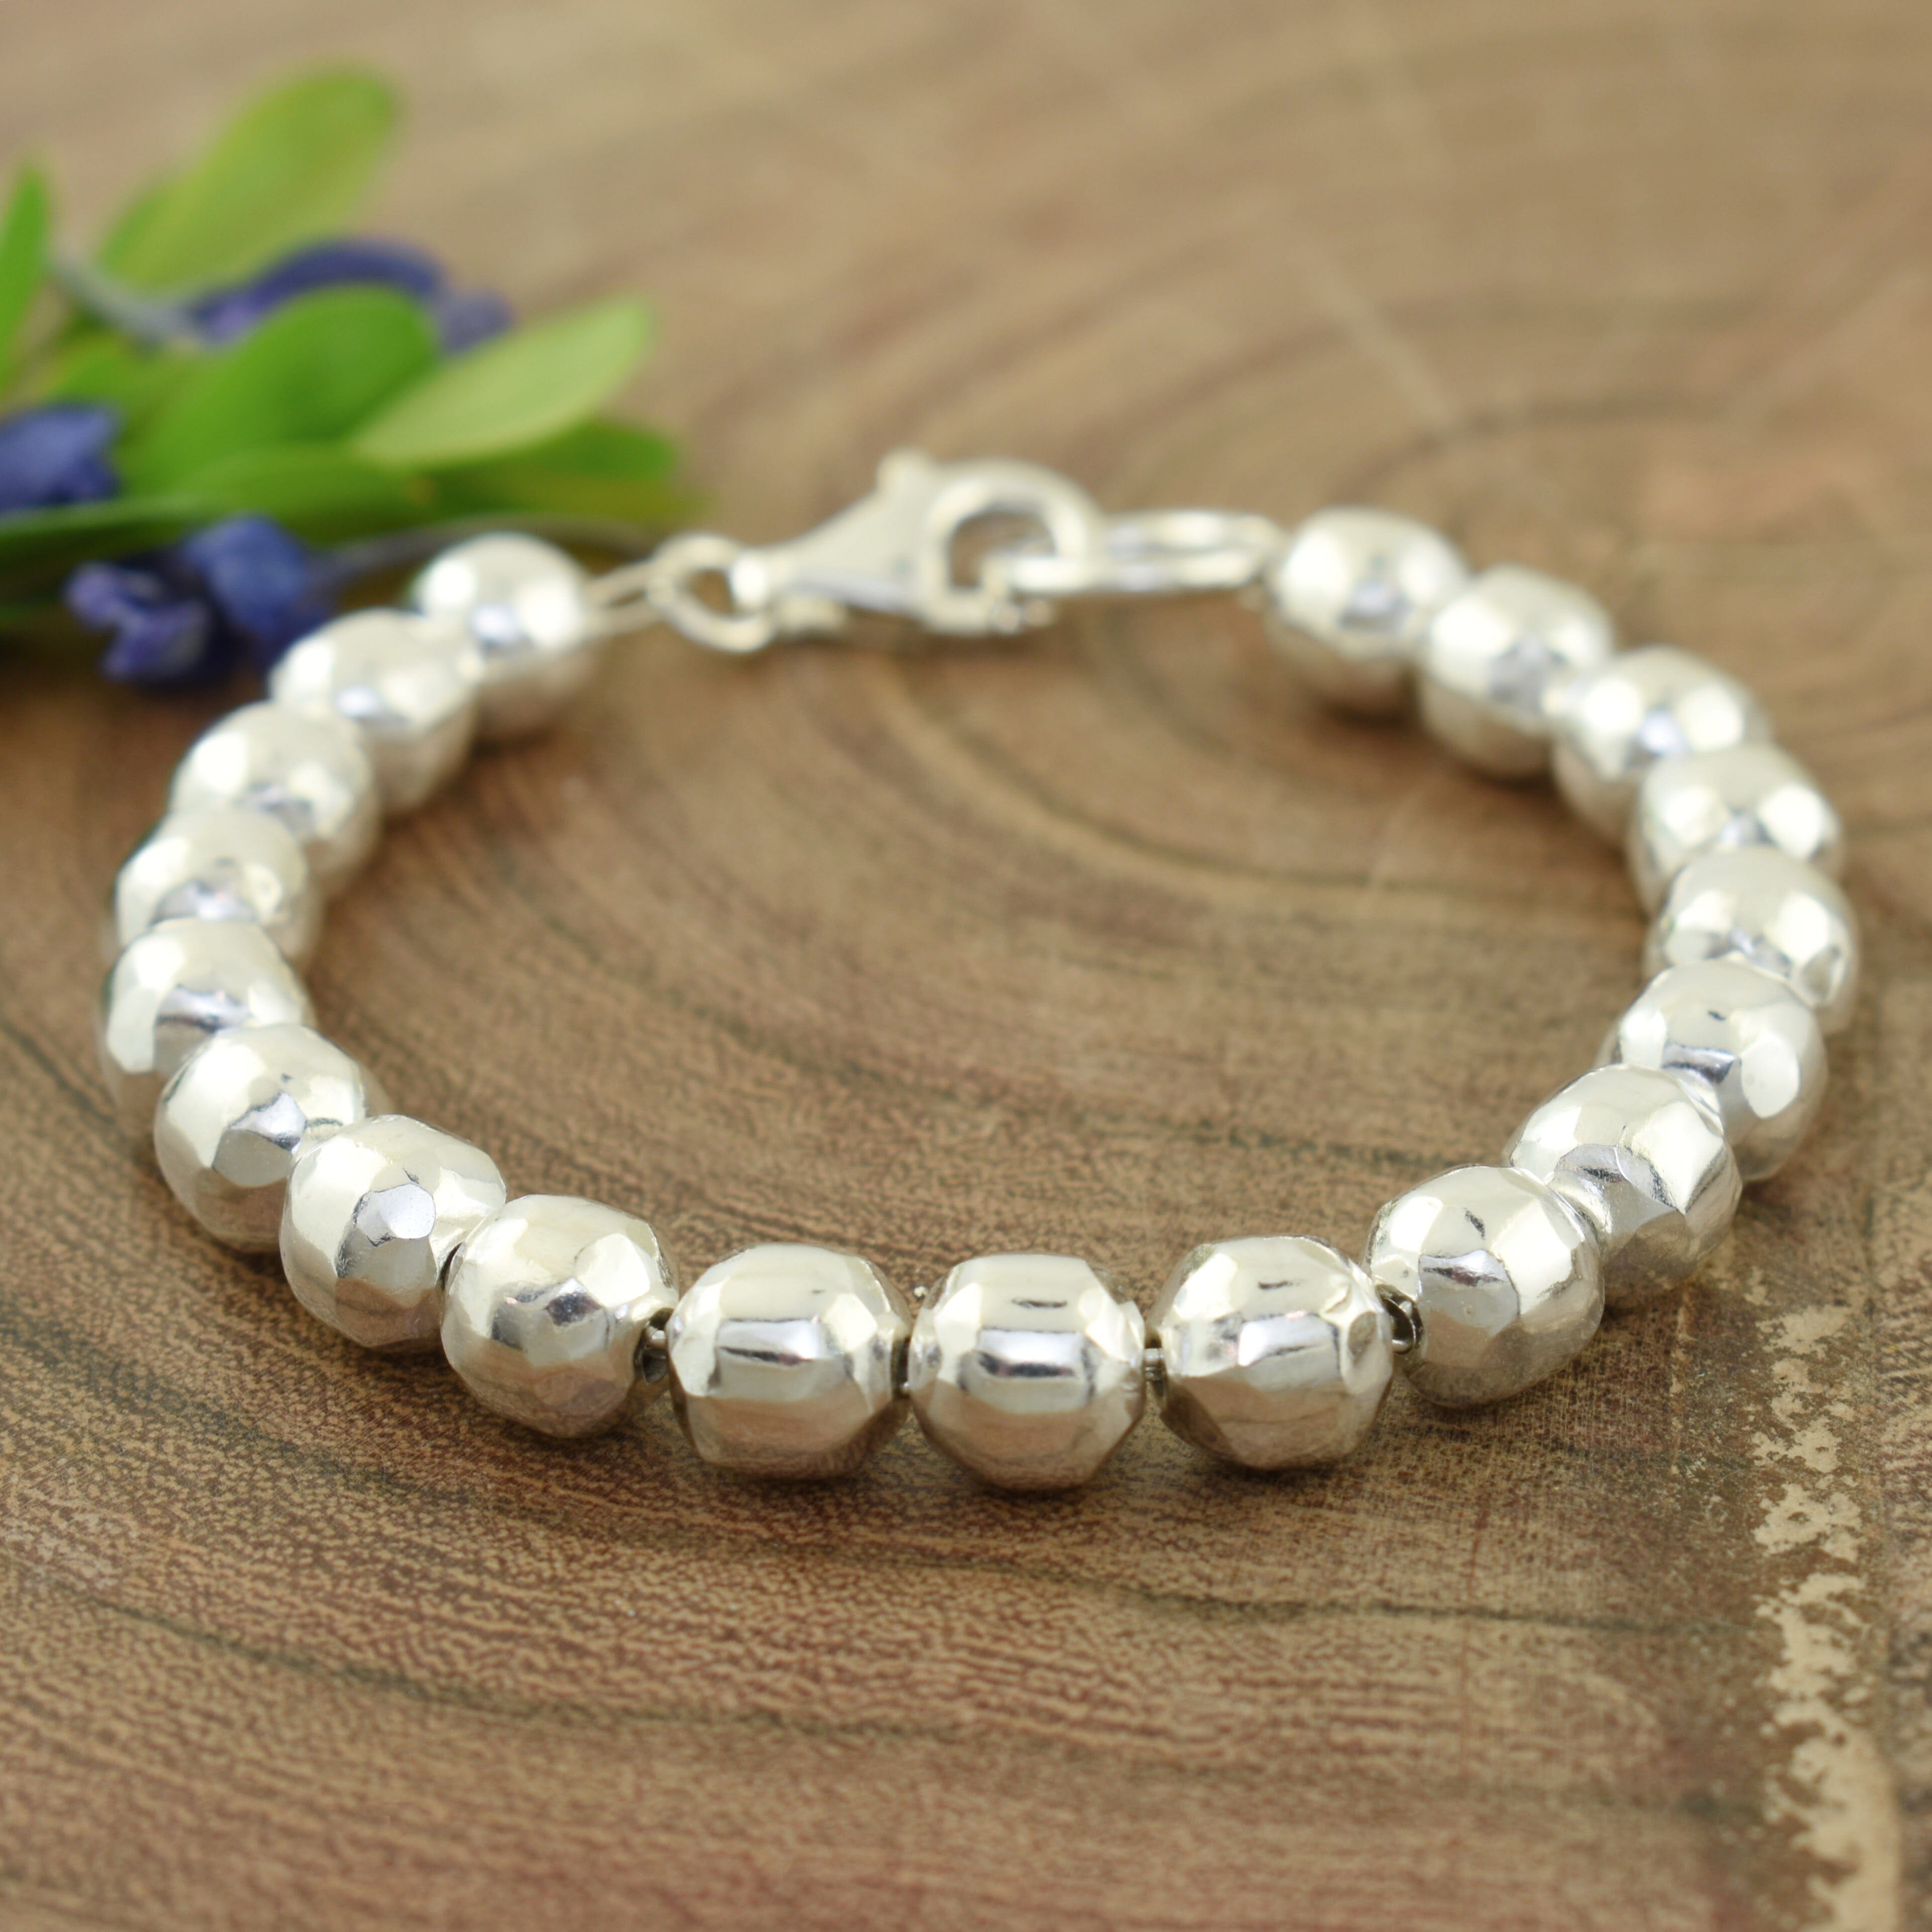 Hammered sterling silver bead bracelet with lobster closure